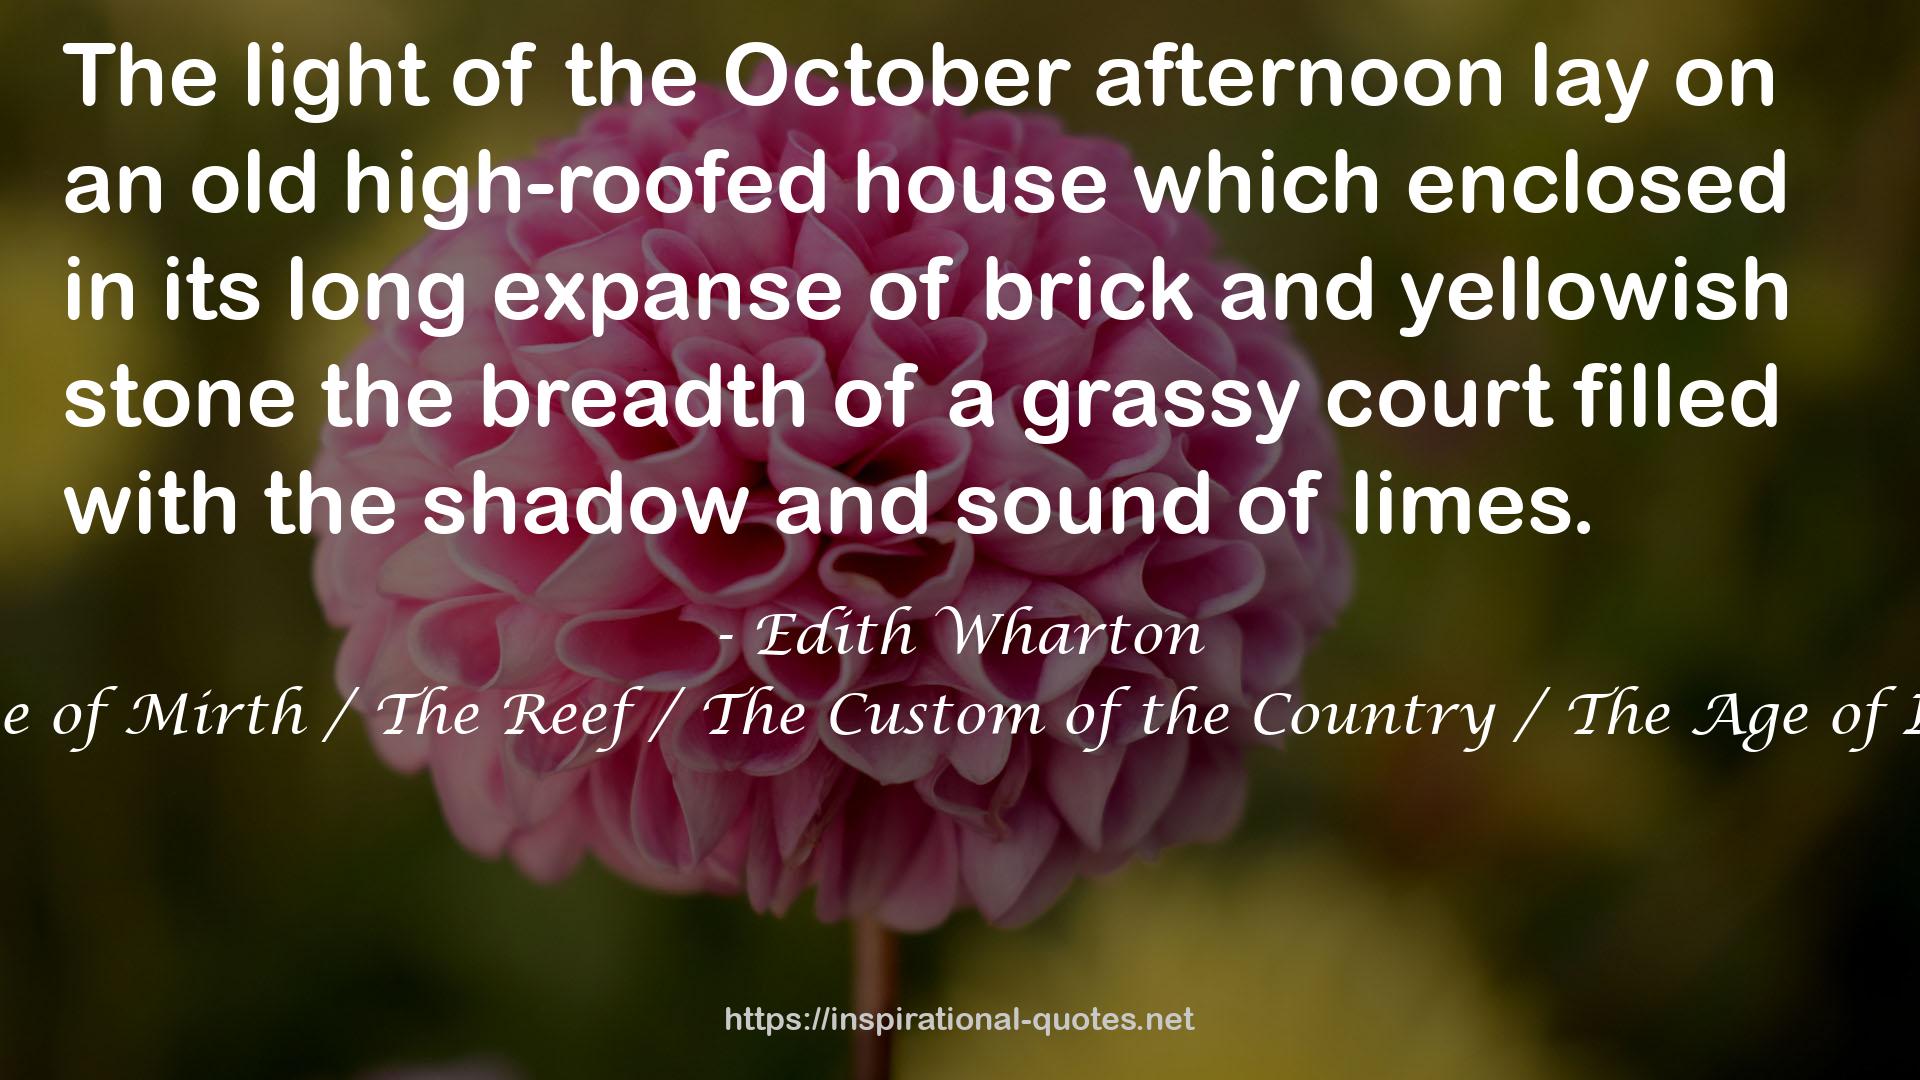 The House of Mirth / The Reef / The Custom of the Country / The Age of Innocence QUOTES